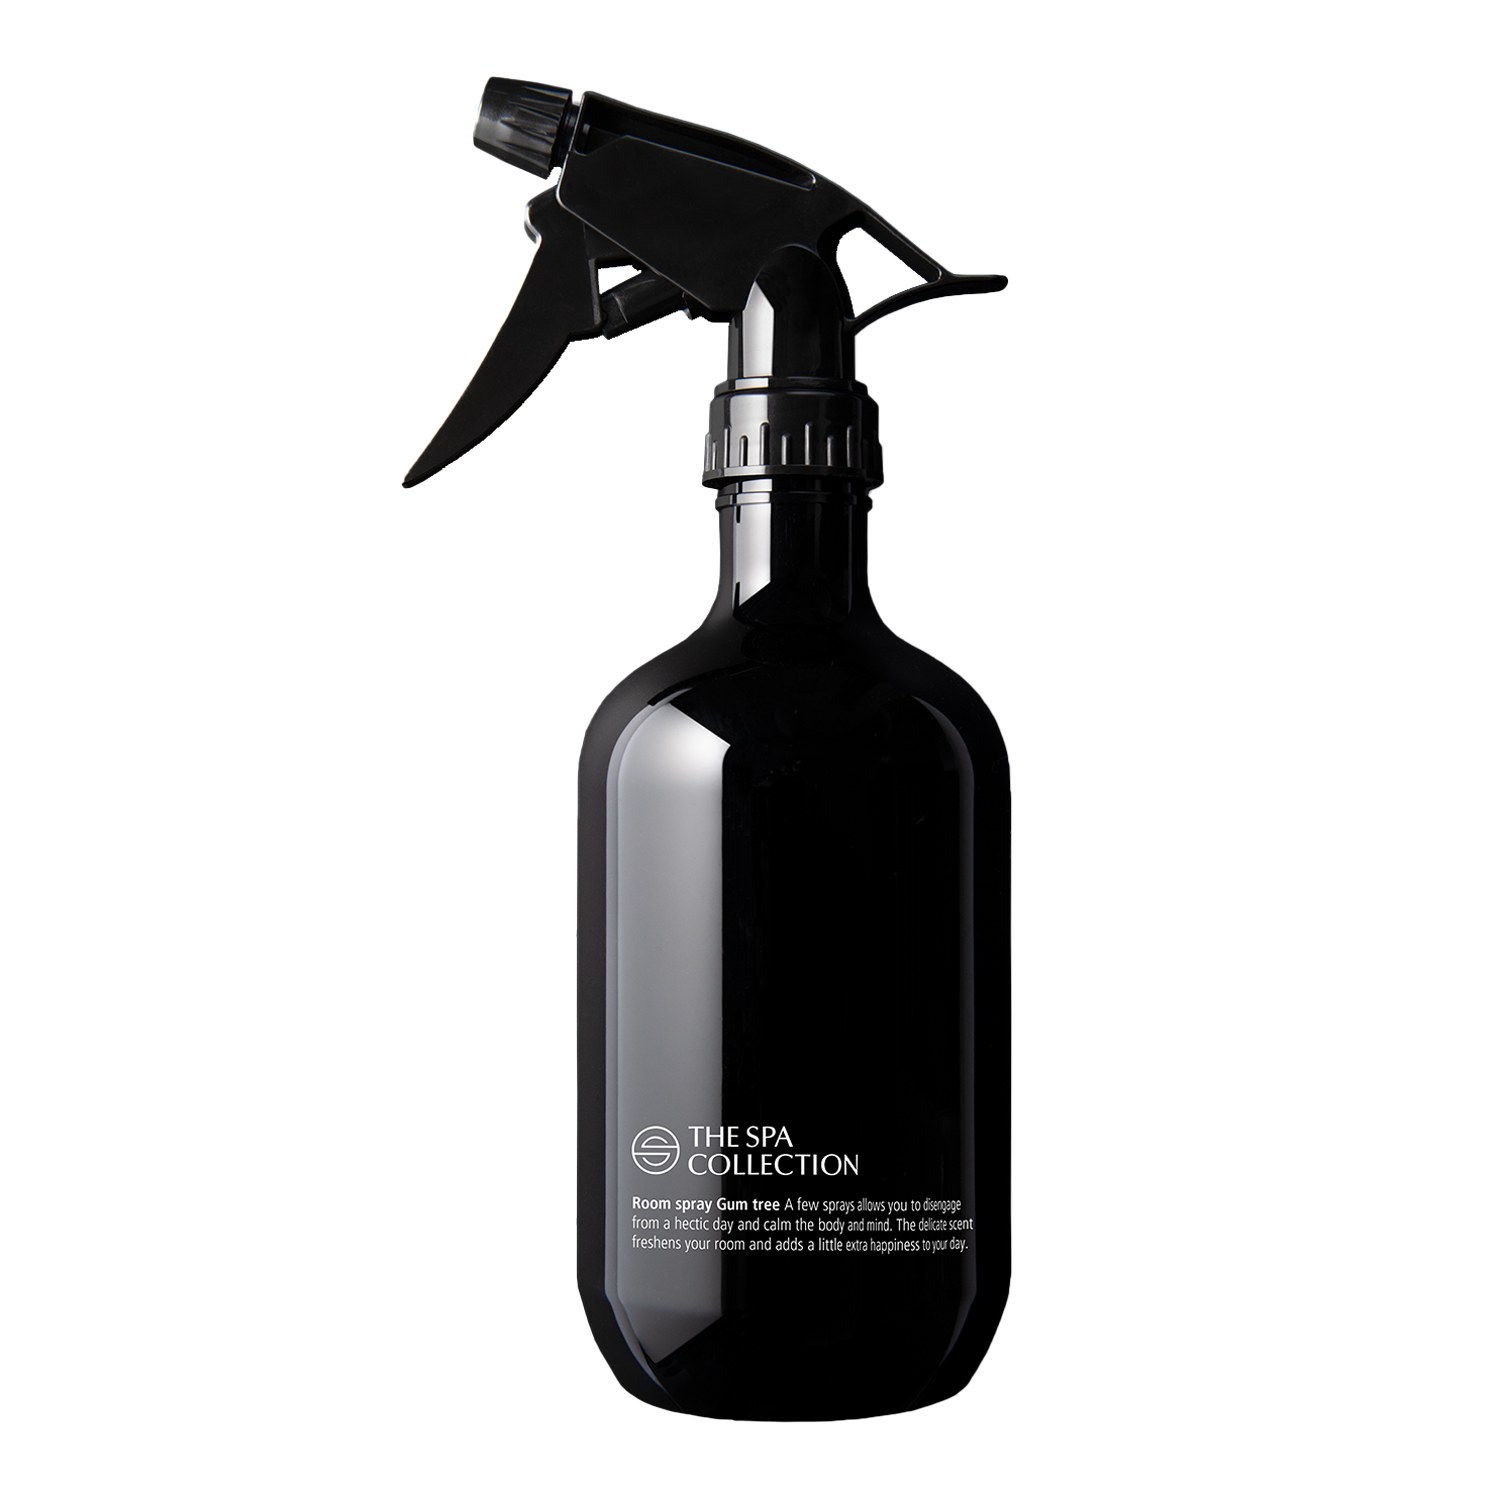 Room spray - 475ml recycled bottle - The Spa Collection Gum Tree